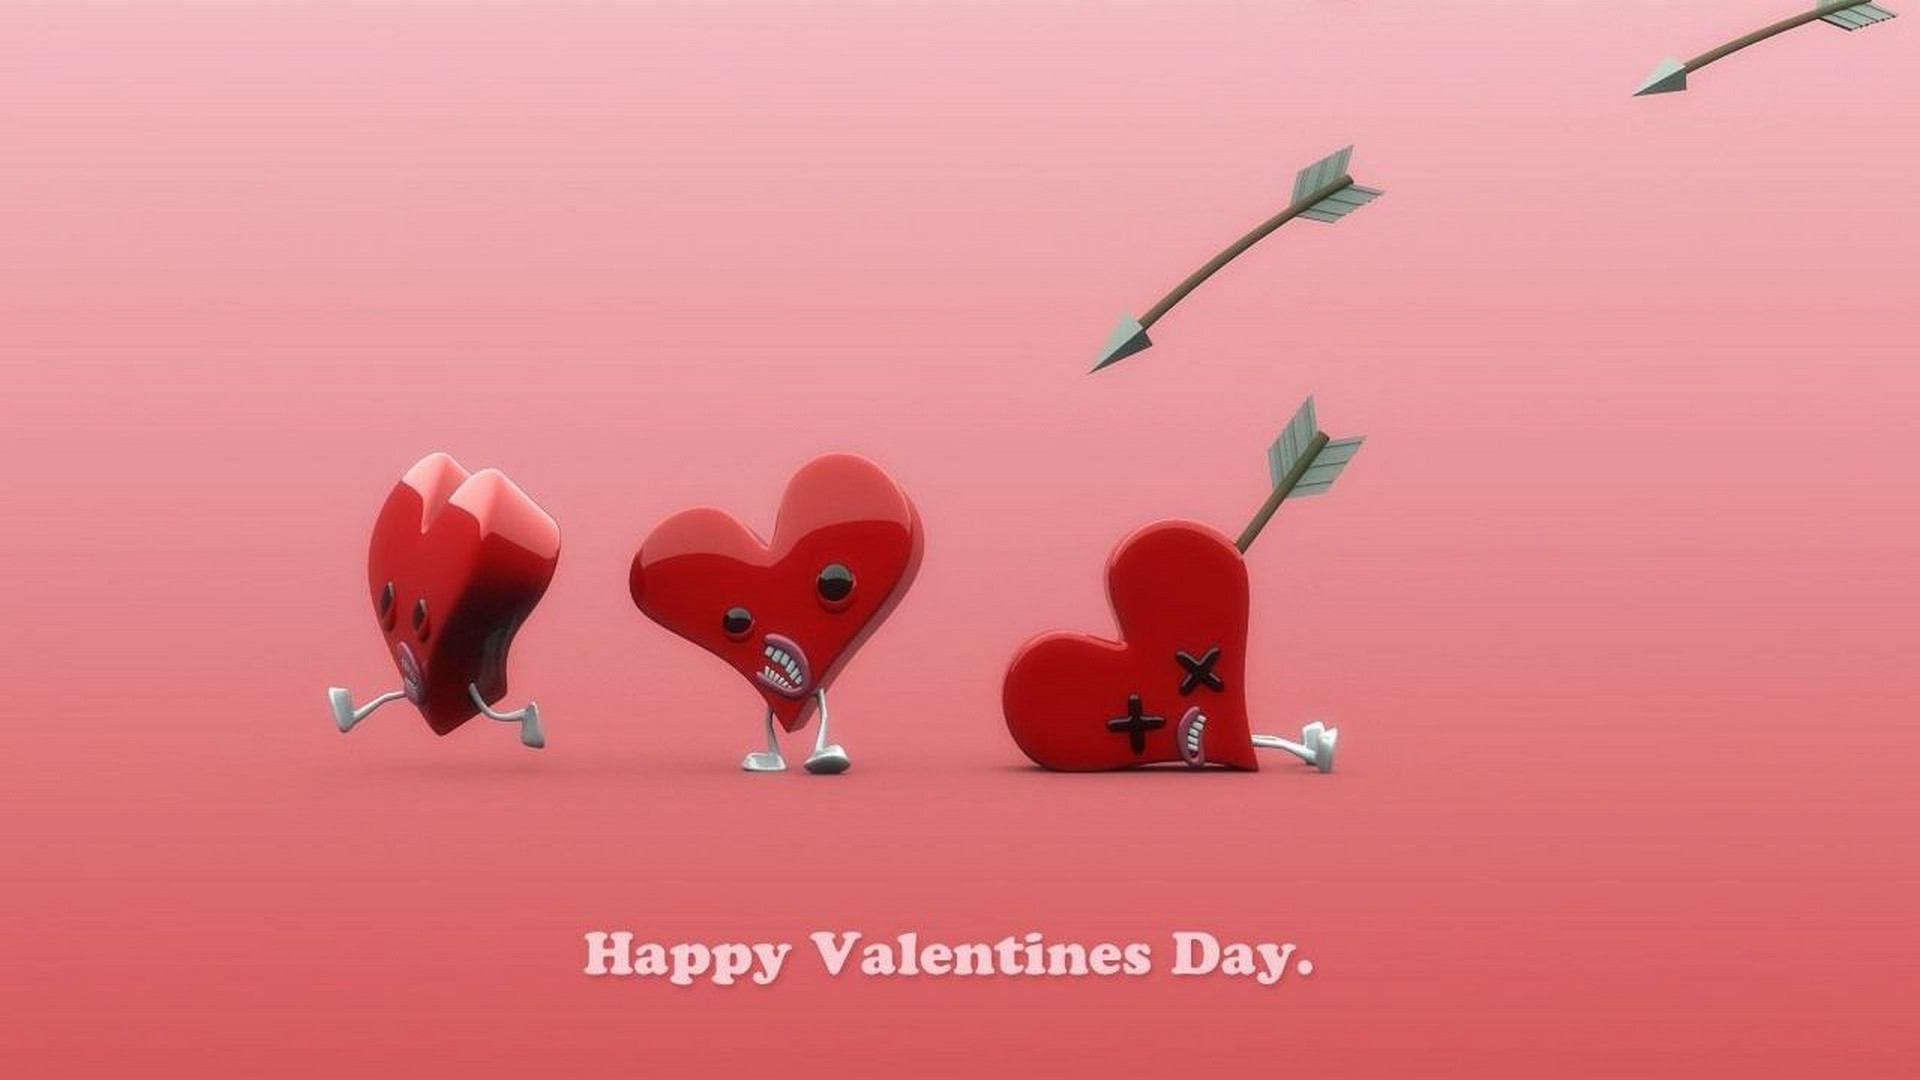 Animated Valentines Day Wallpaper Cute